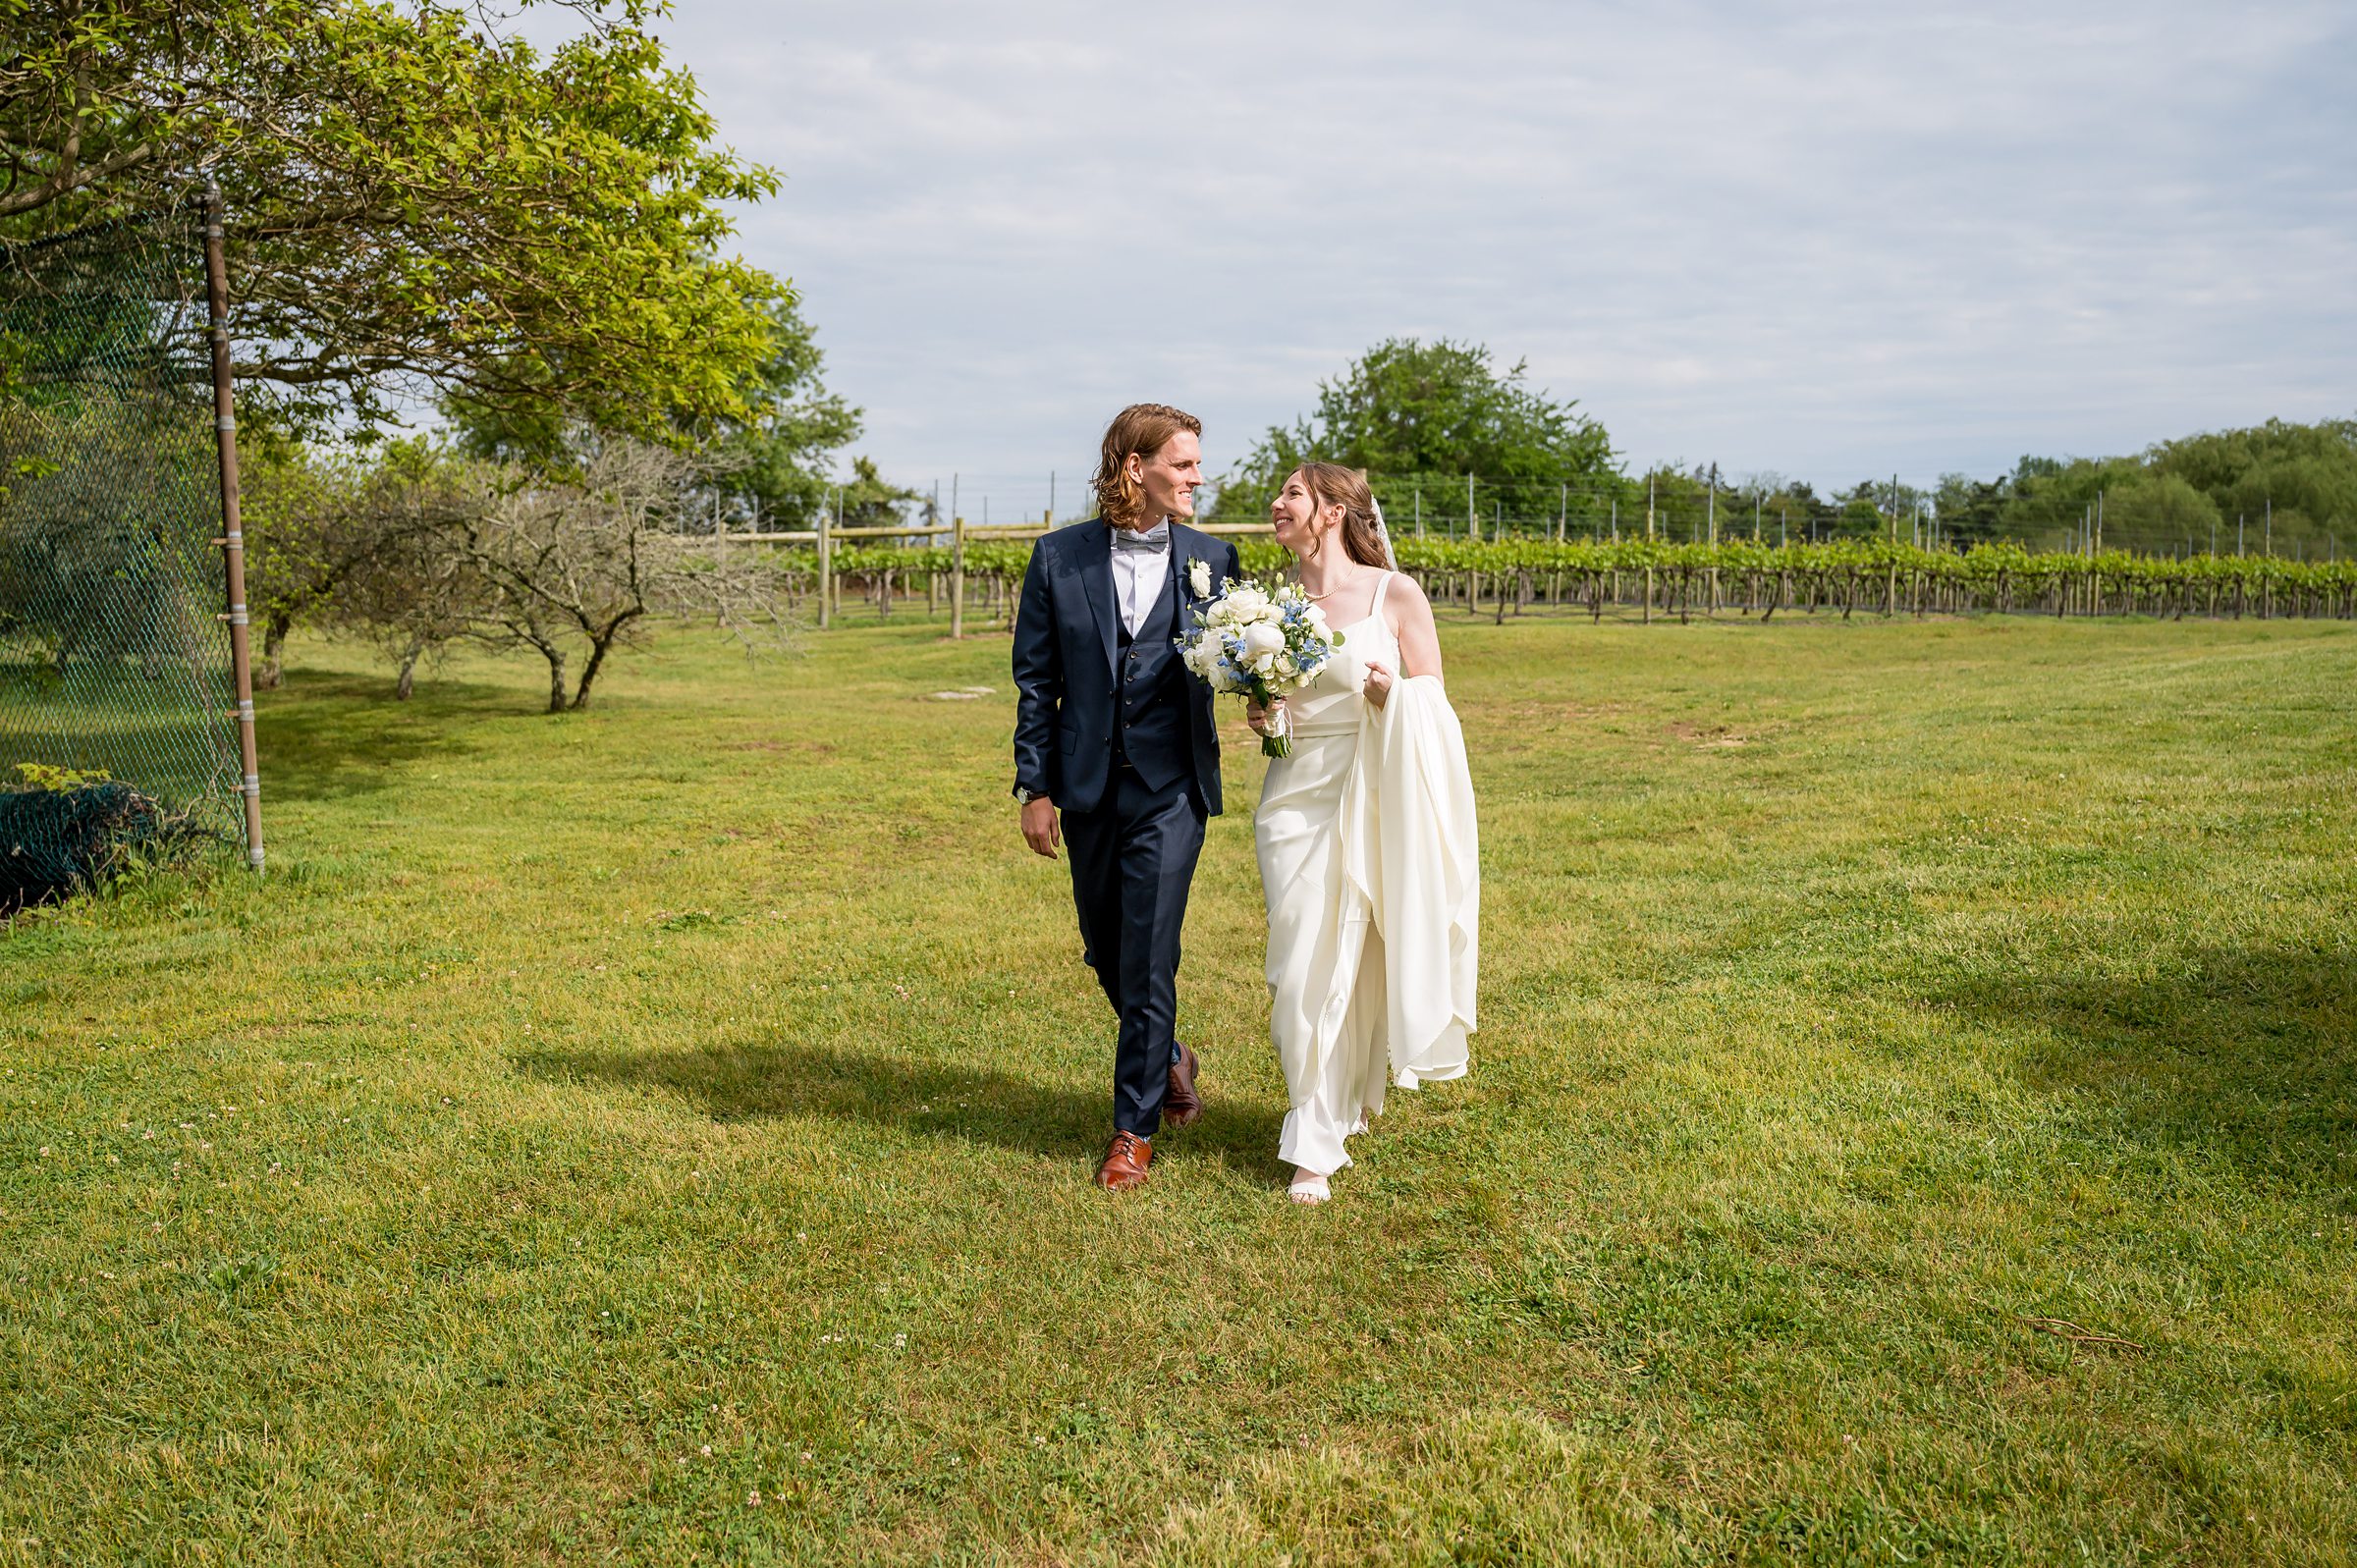 A bride and groom walk together on a grassy field. The bride carries a bouquet of flowers and wears a white wedding dress, while the groom wears a dark suit. Trees and greenery are visible in the background.